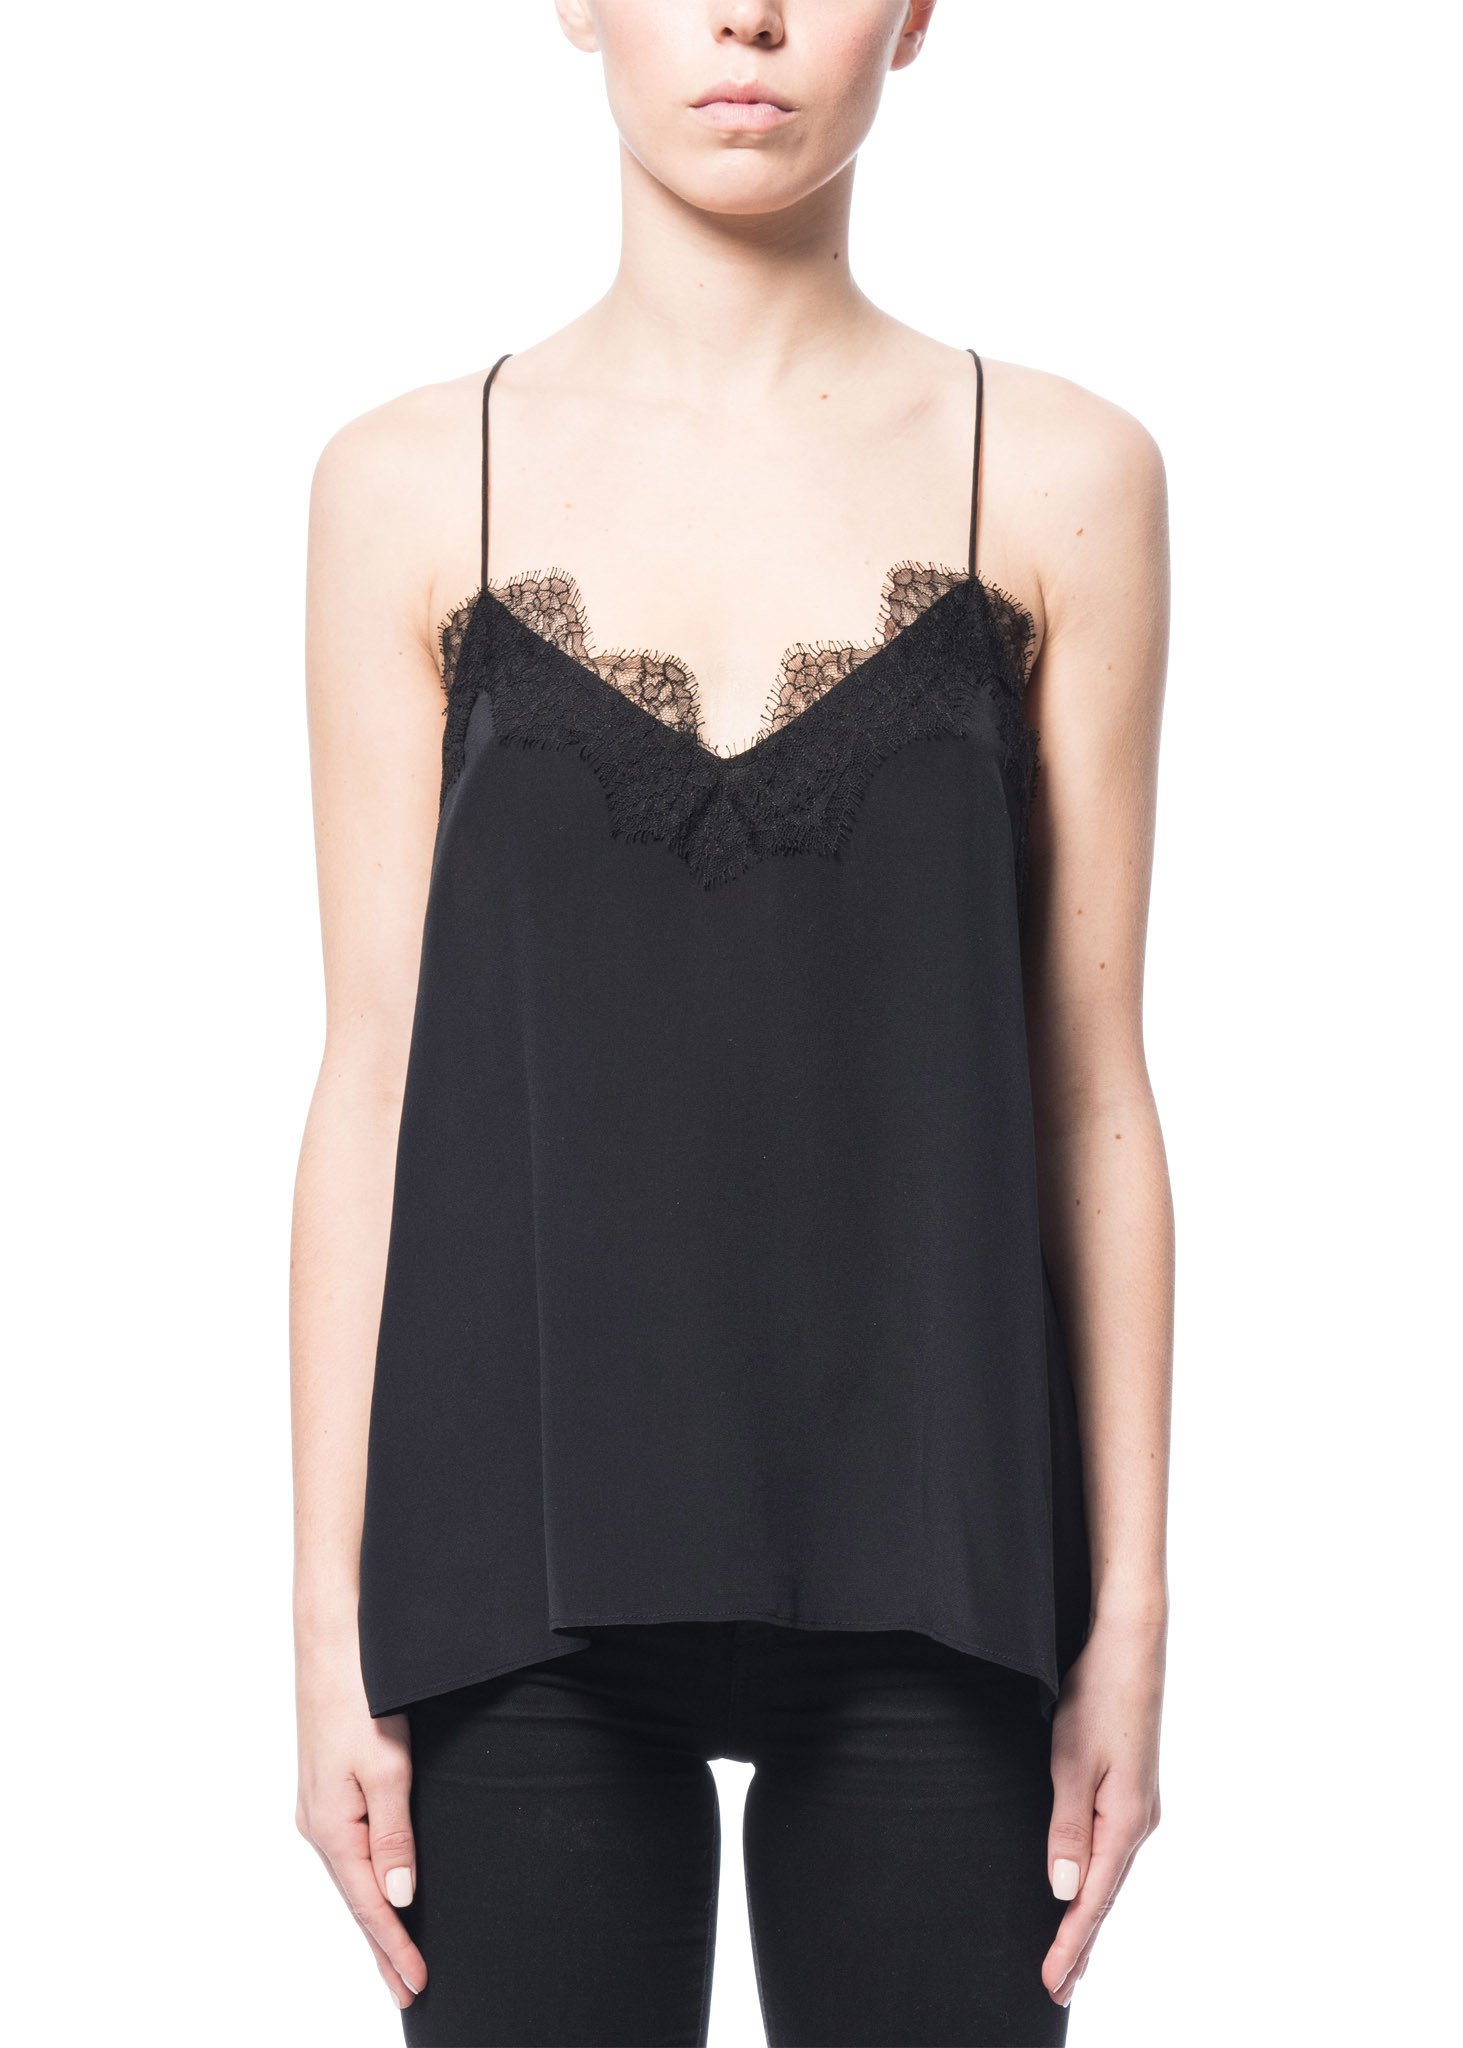 The Racer Black – Cami NYC